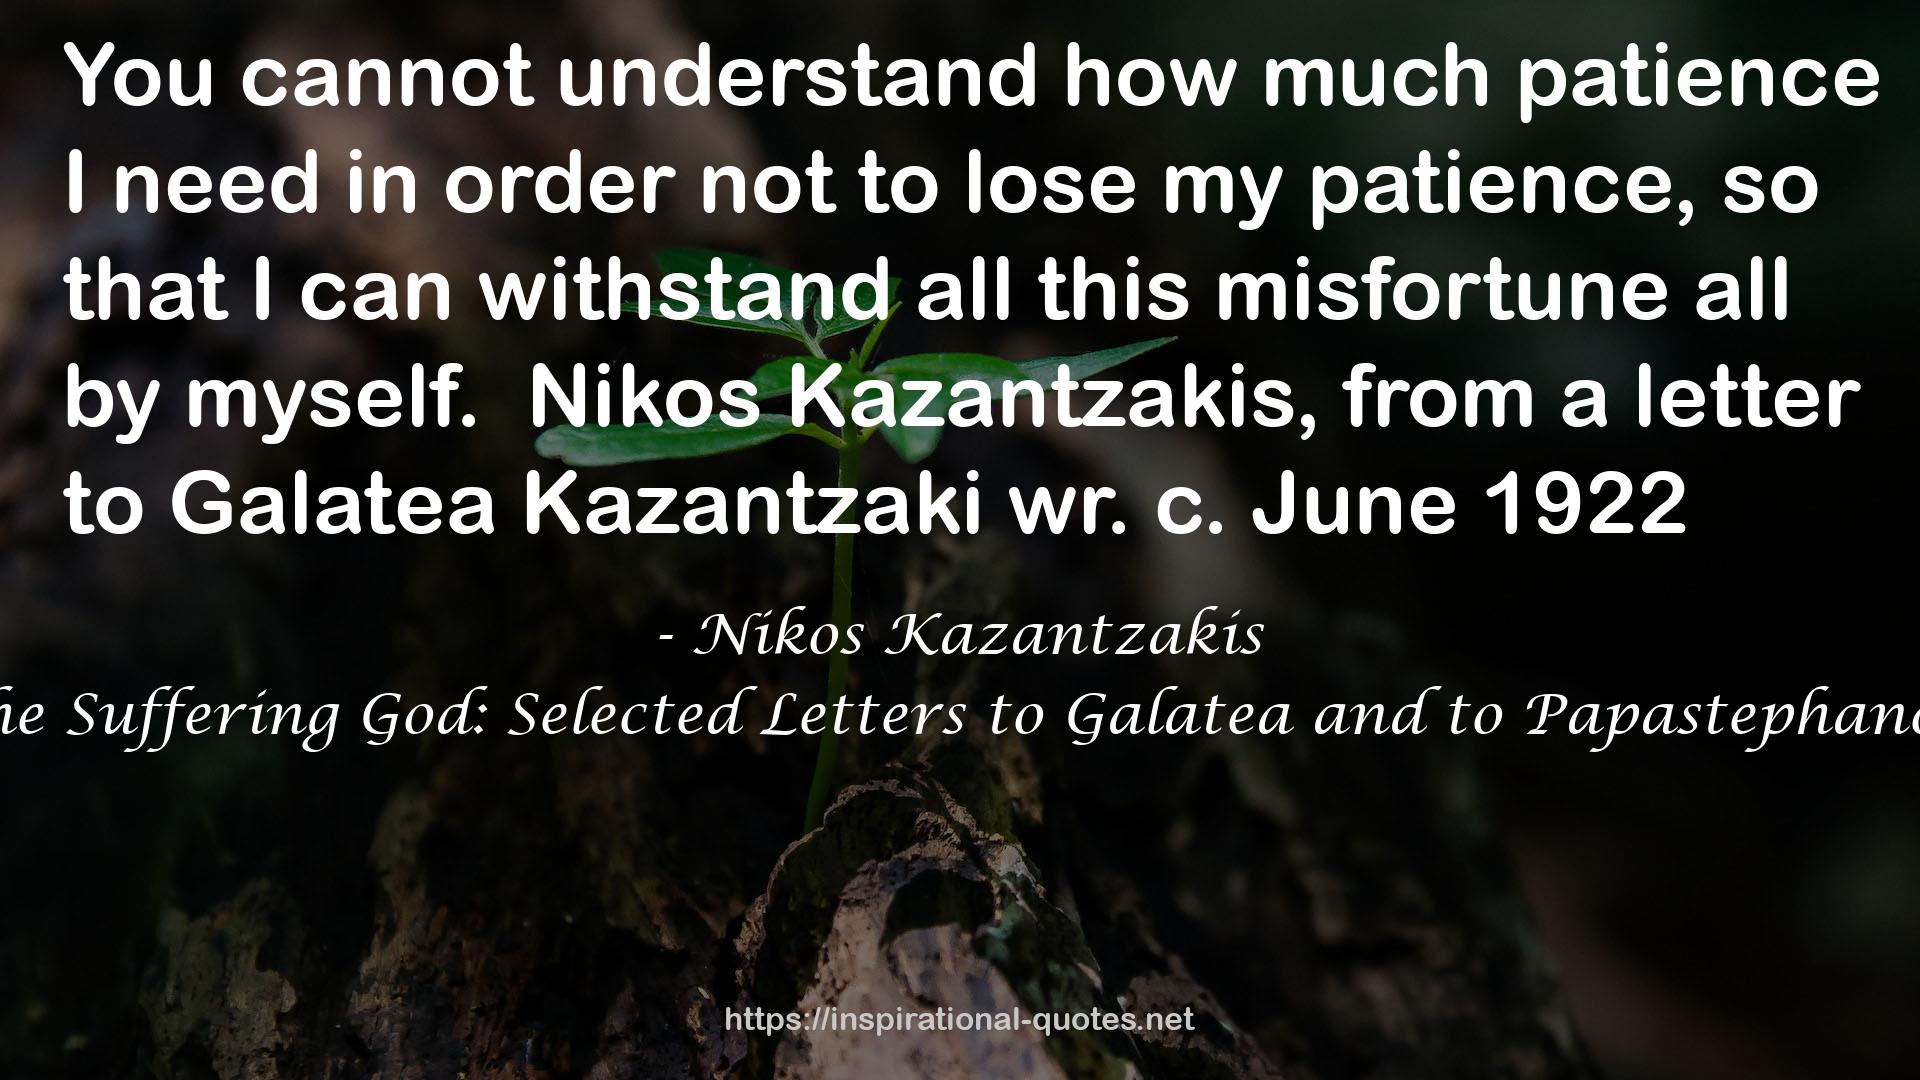 The Suffering God: Selected Letters to Galatea and to Papastephanou QUOTES